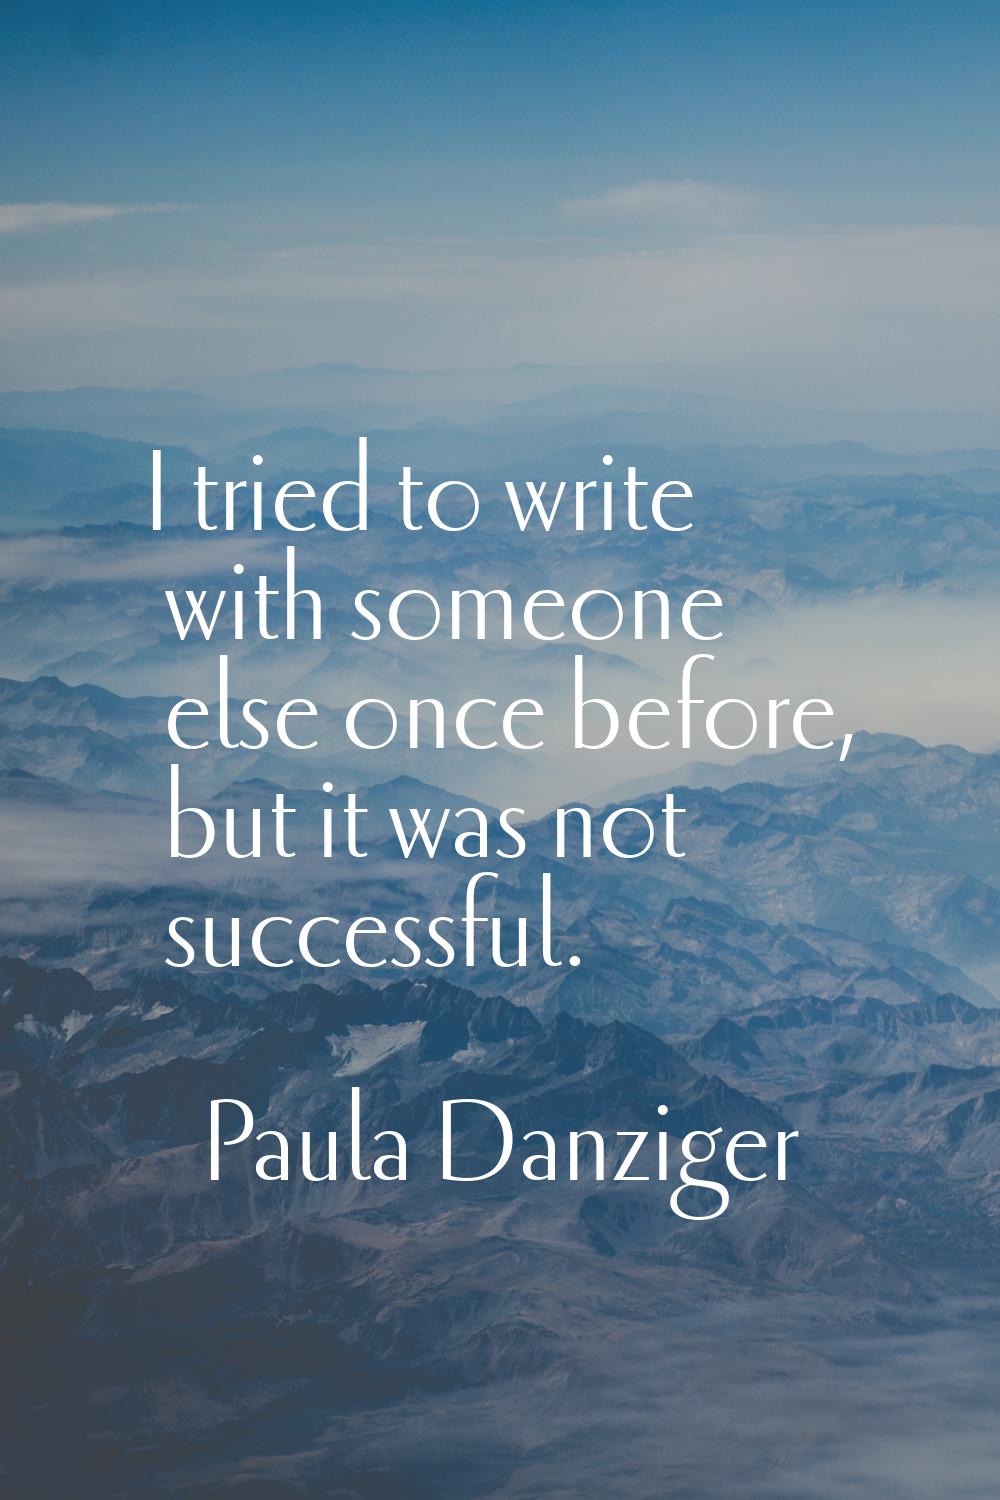 I tried to write with someone else once before, but it was not successful.